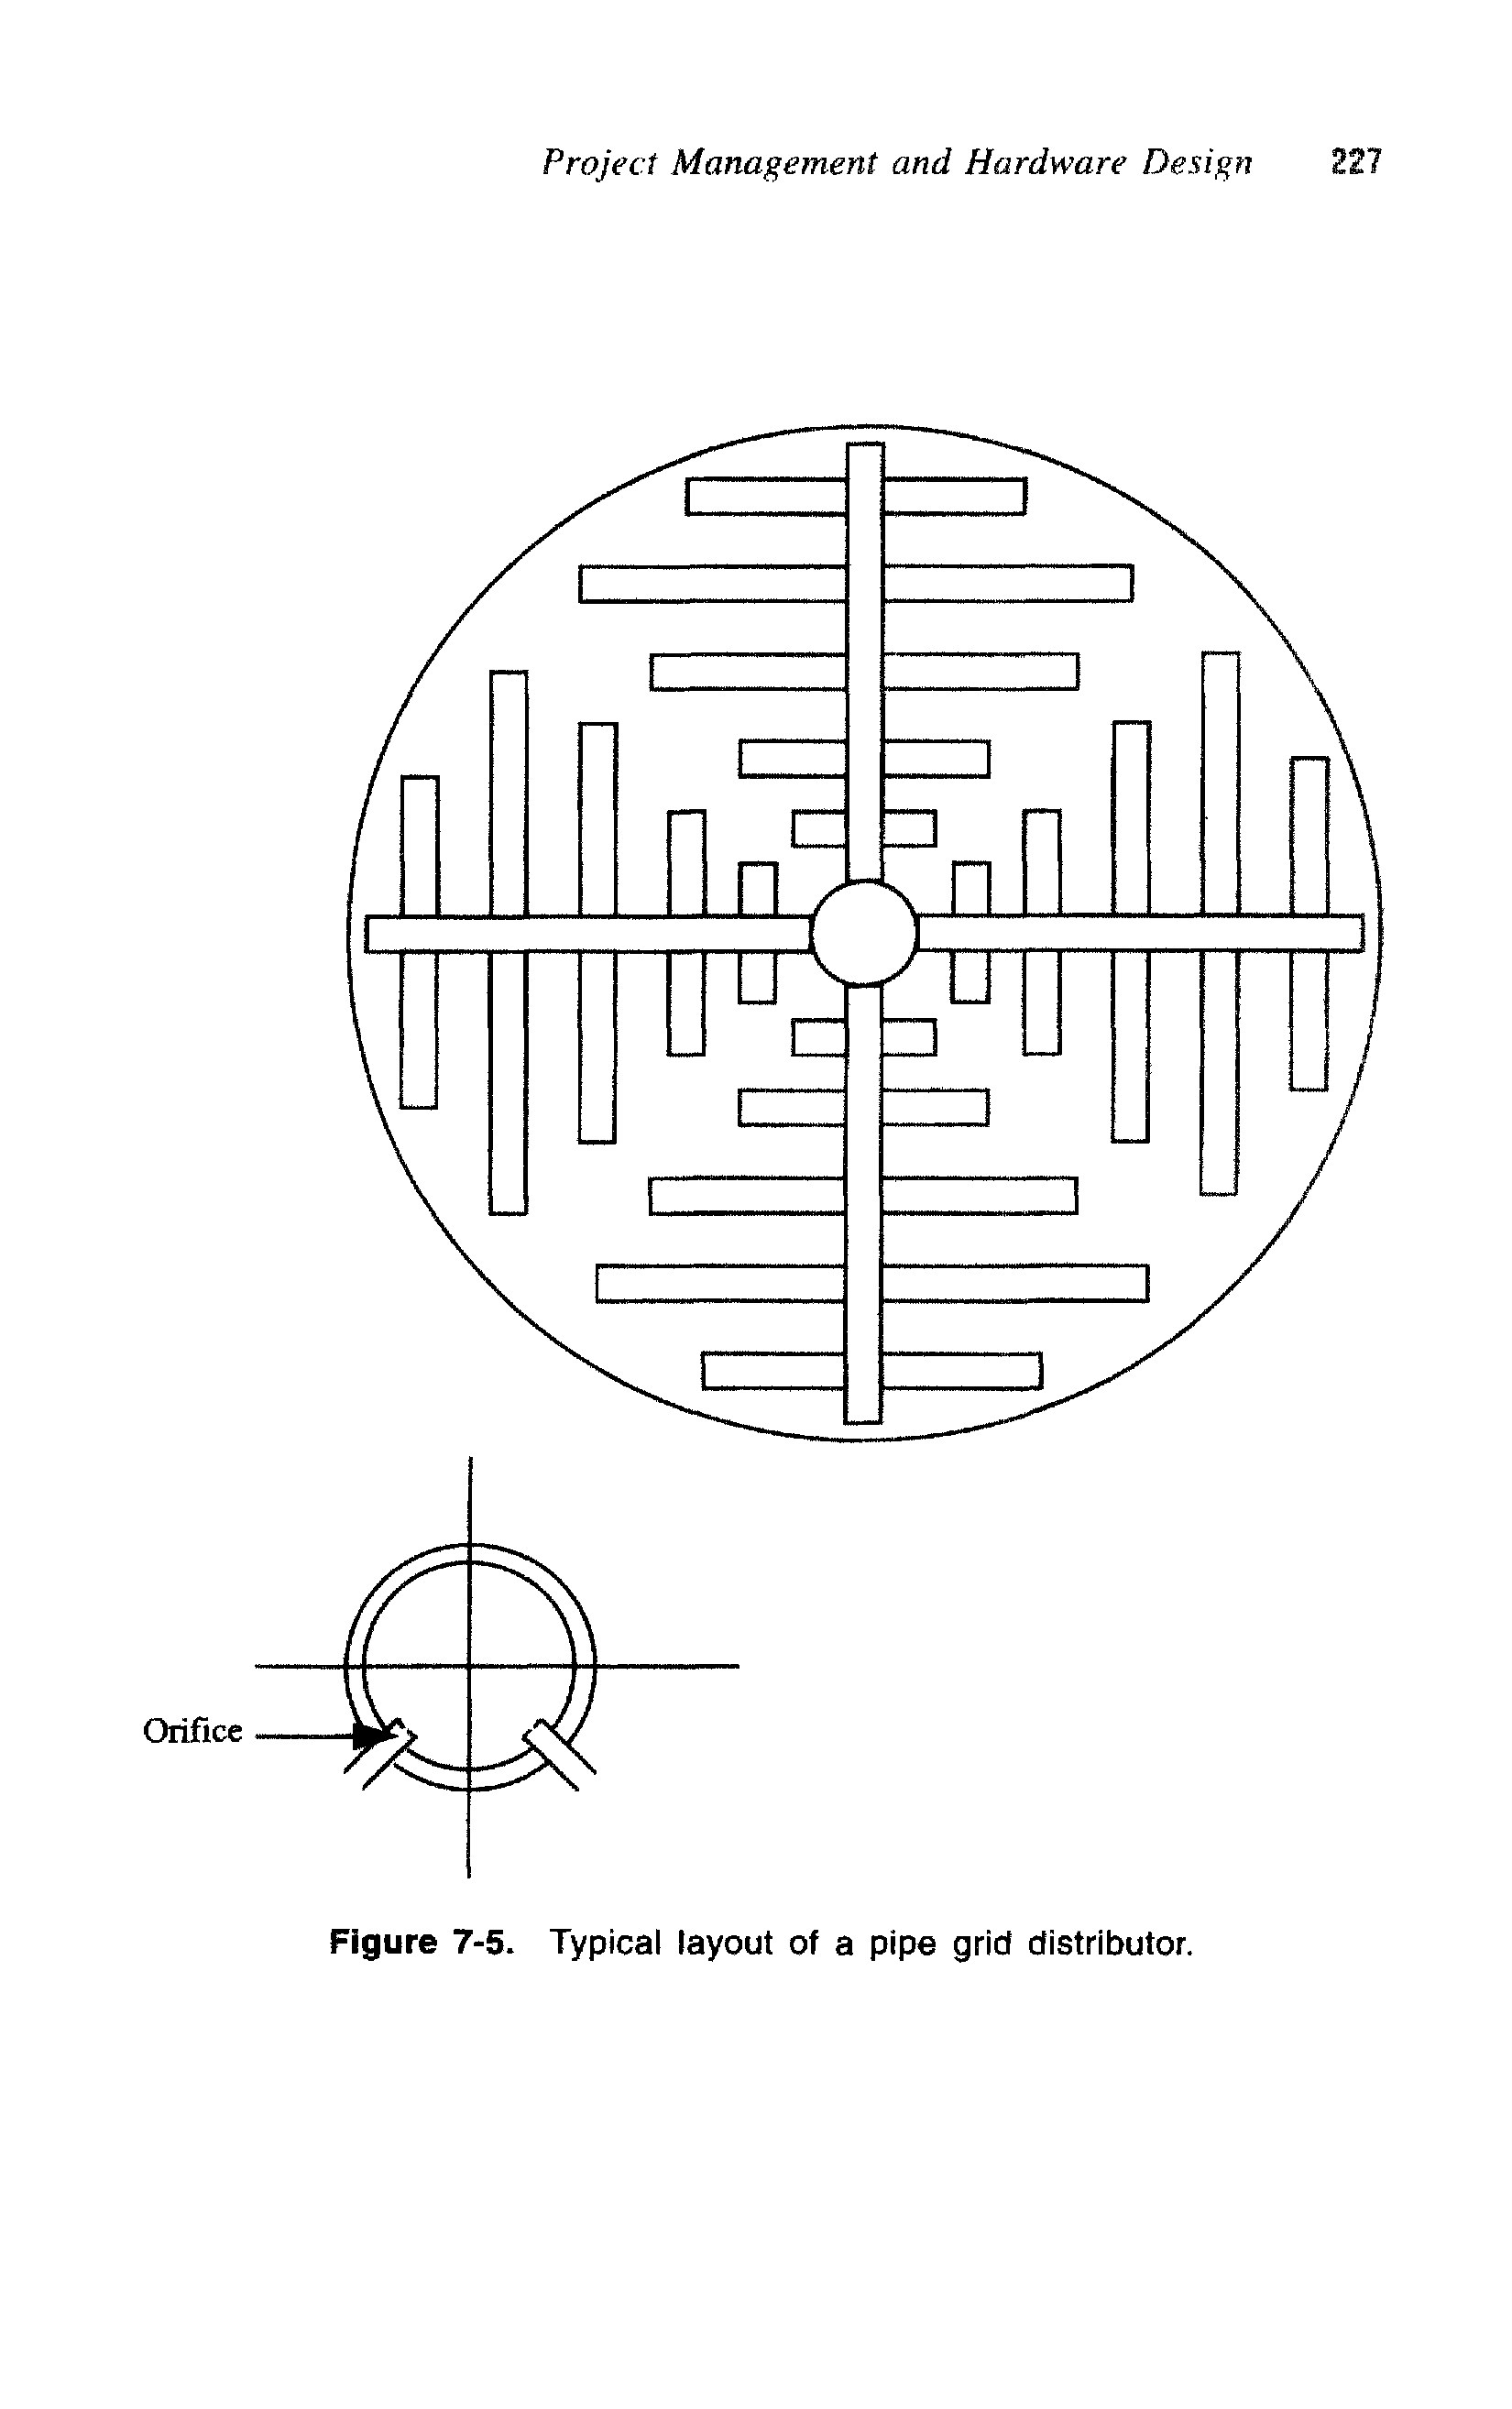 Figure 7-5. Typical layout of a pipe grid distributor.